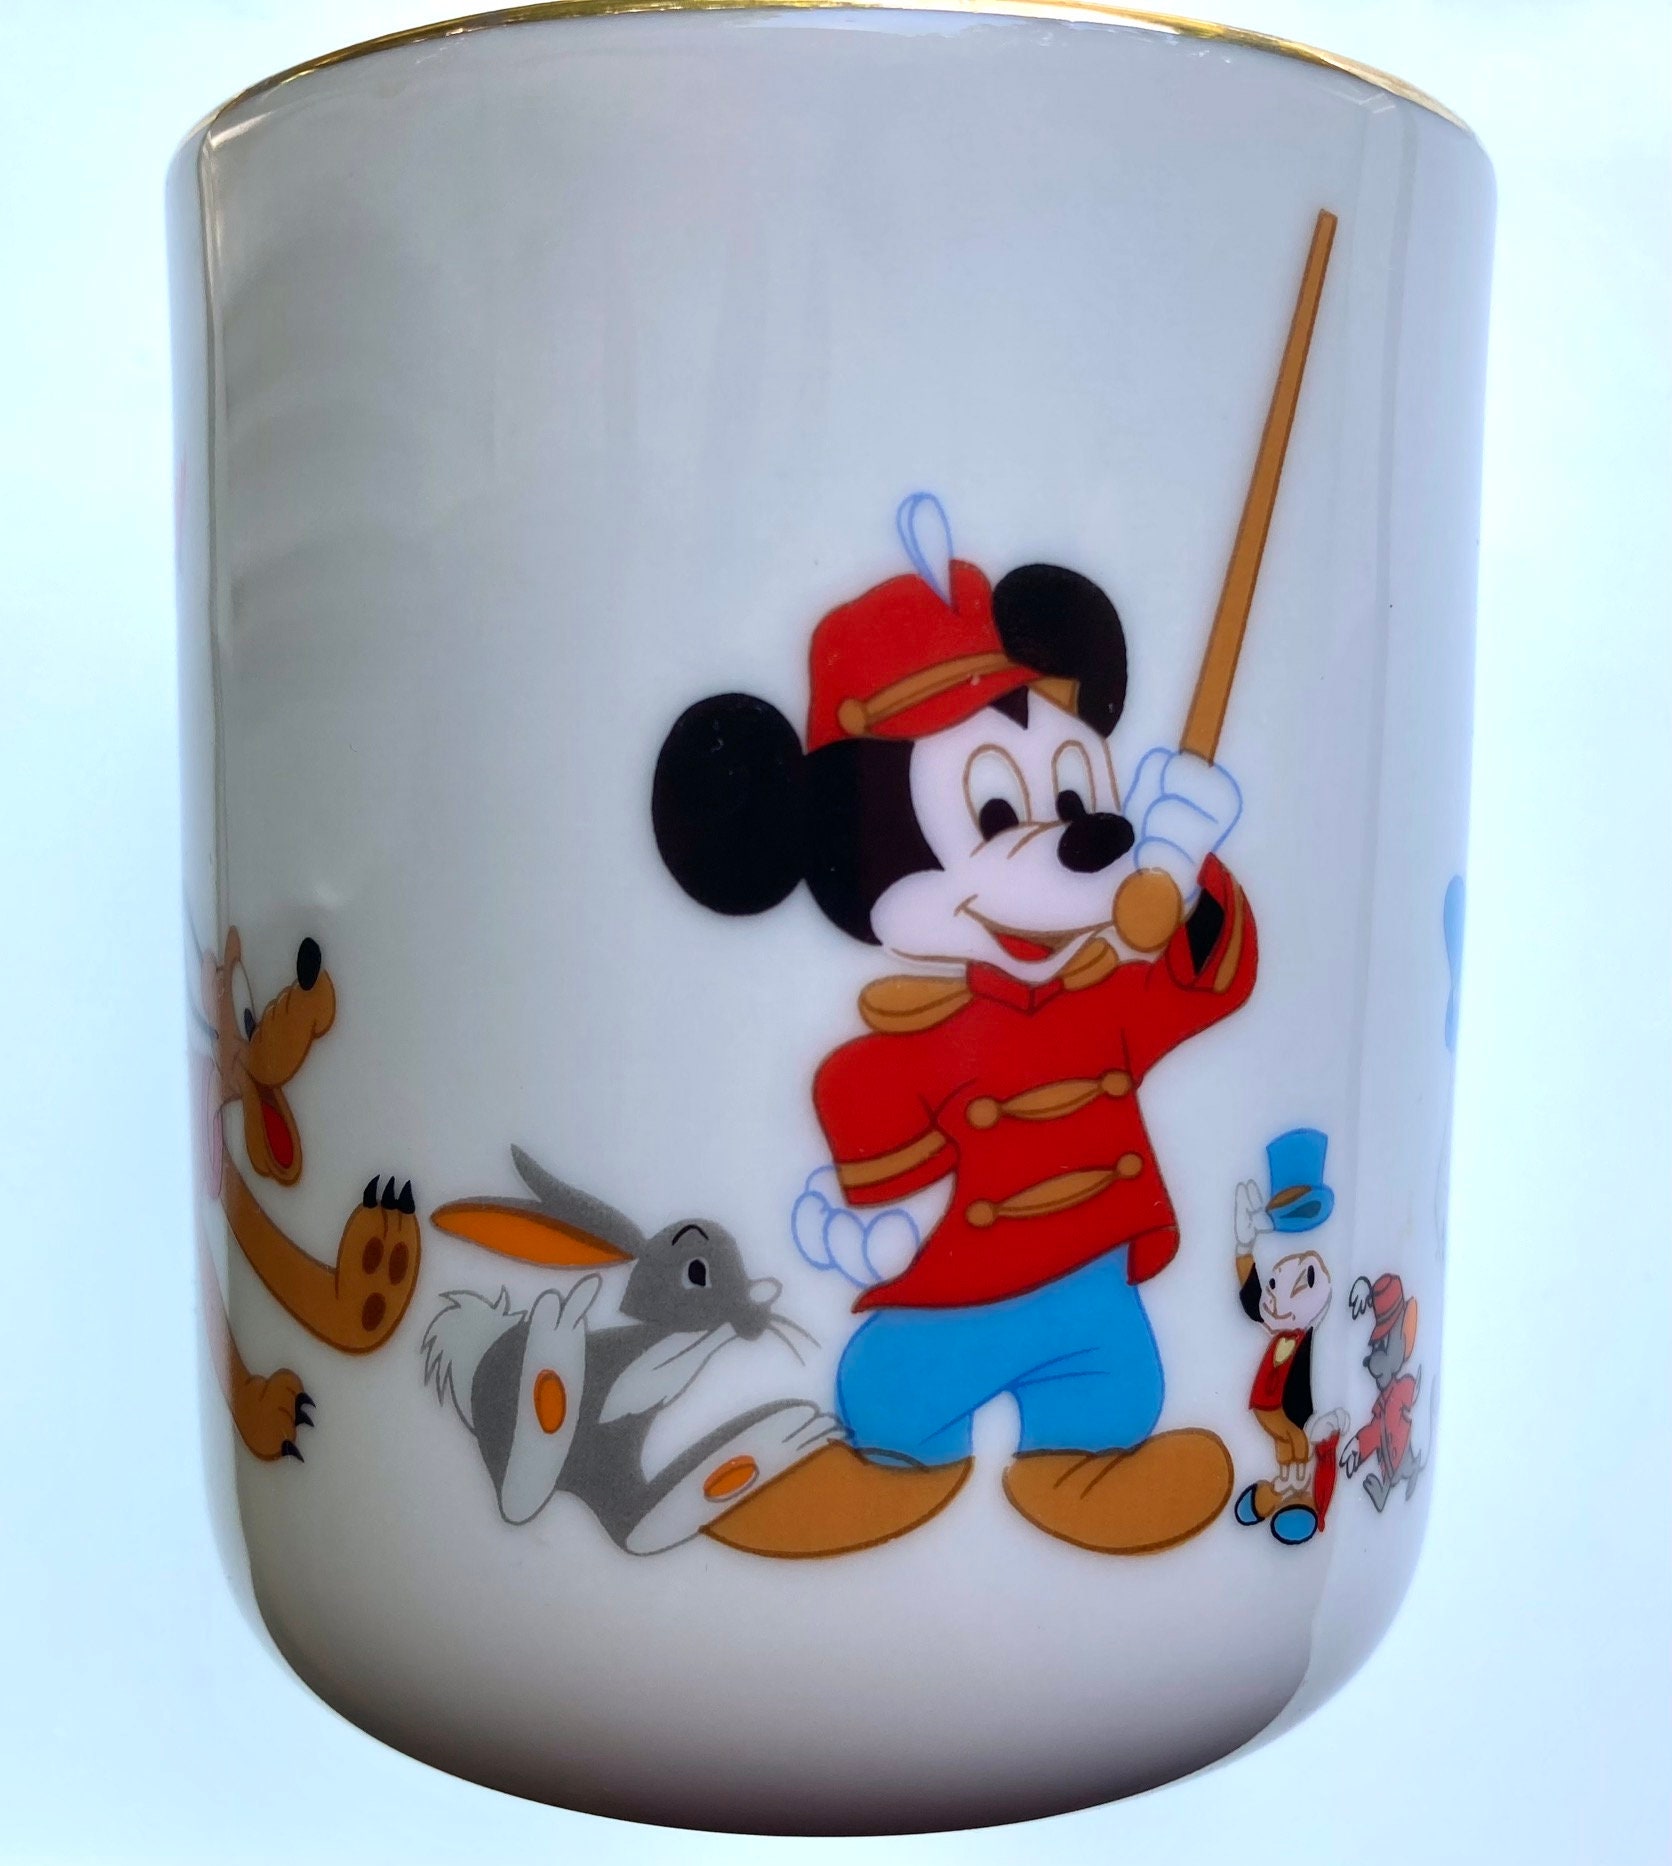 Vintage Disney Mug Made Exclusively for Walt Disney, Japan, Gorgeous  Graphics, All the Gang is Here, Mickey,minnie,pluto,goofy,donald, Nice 